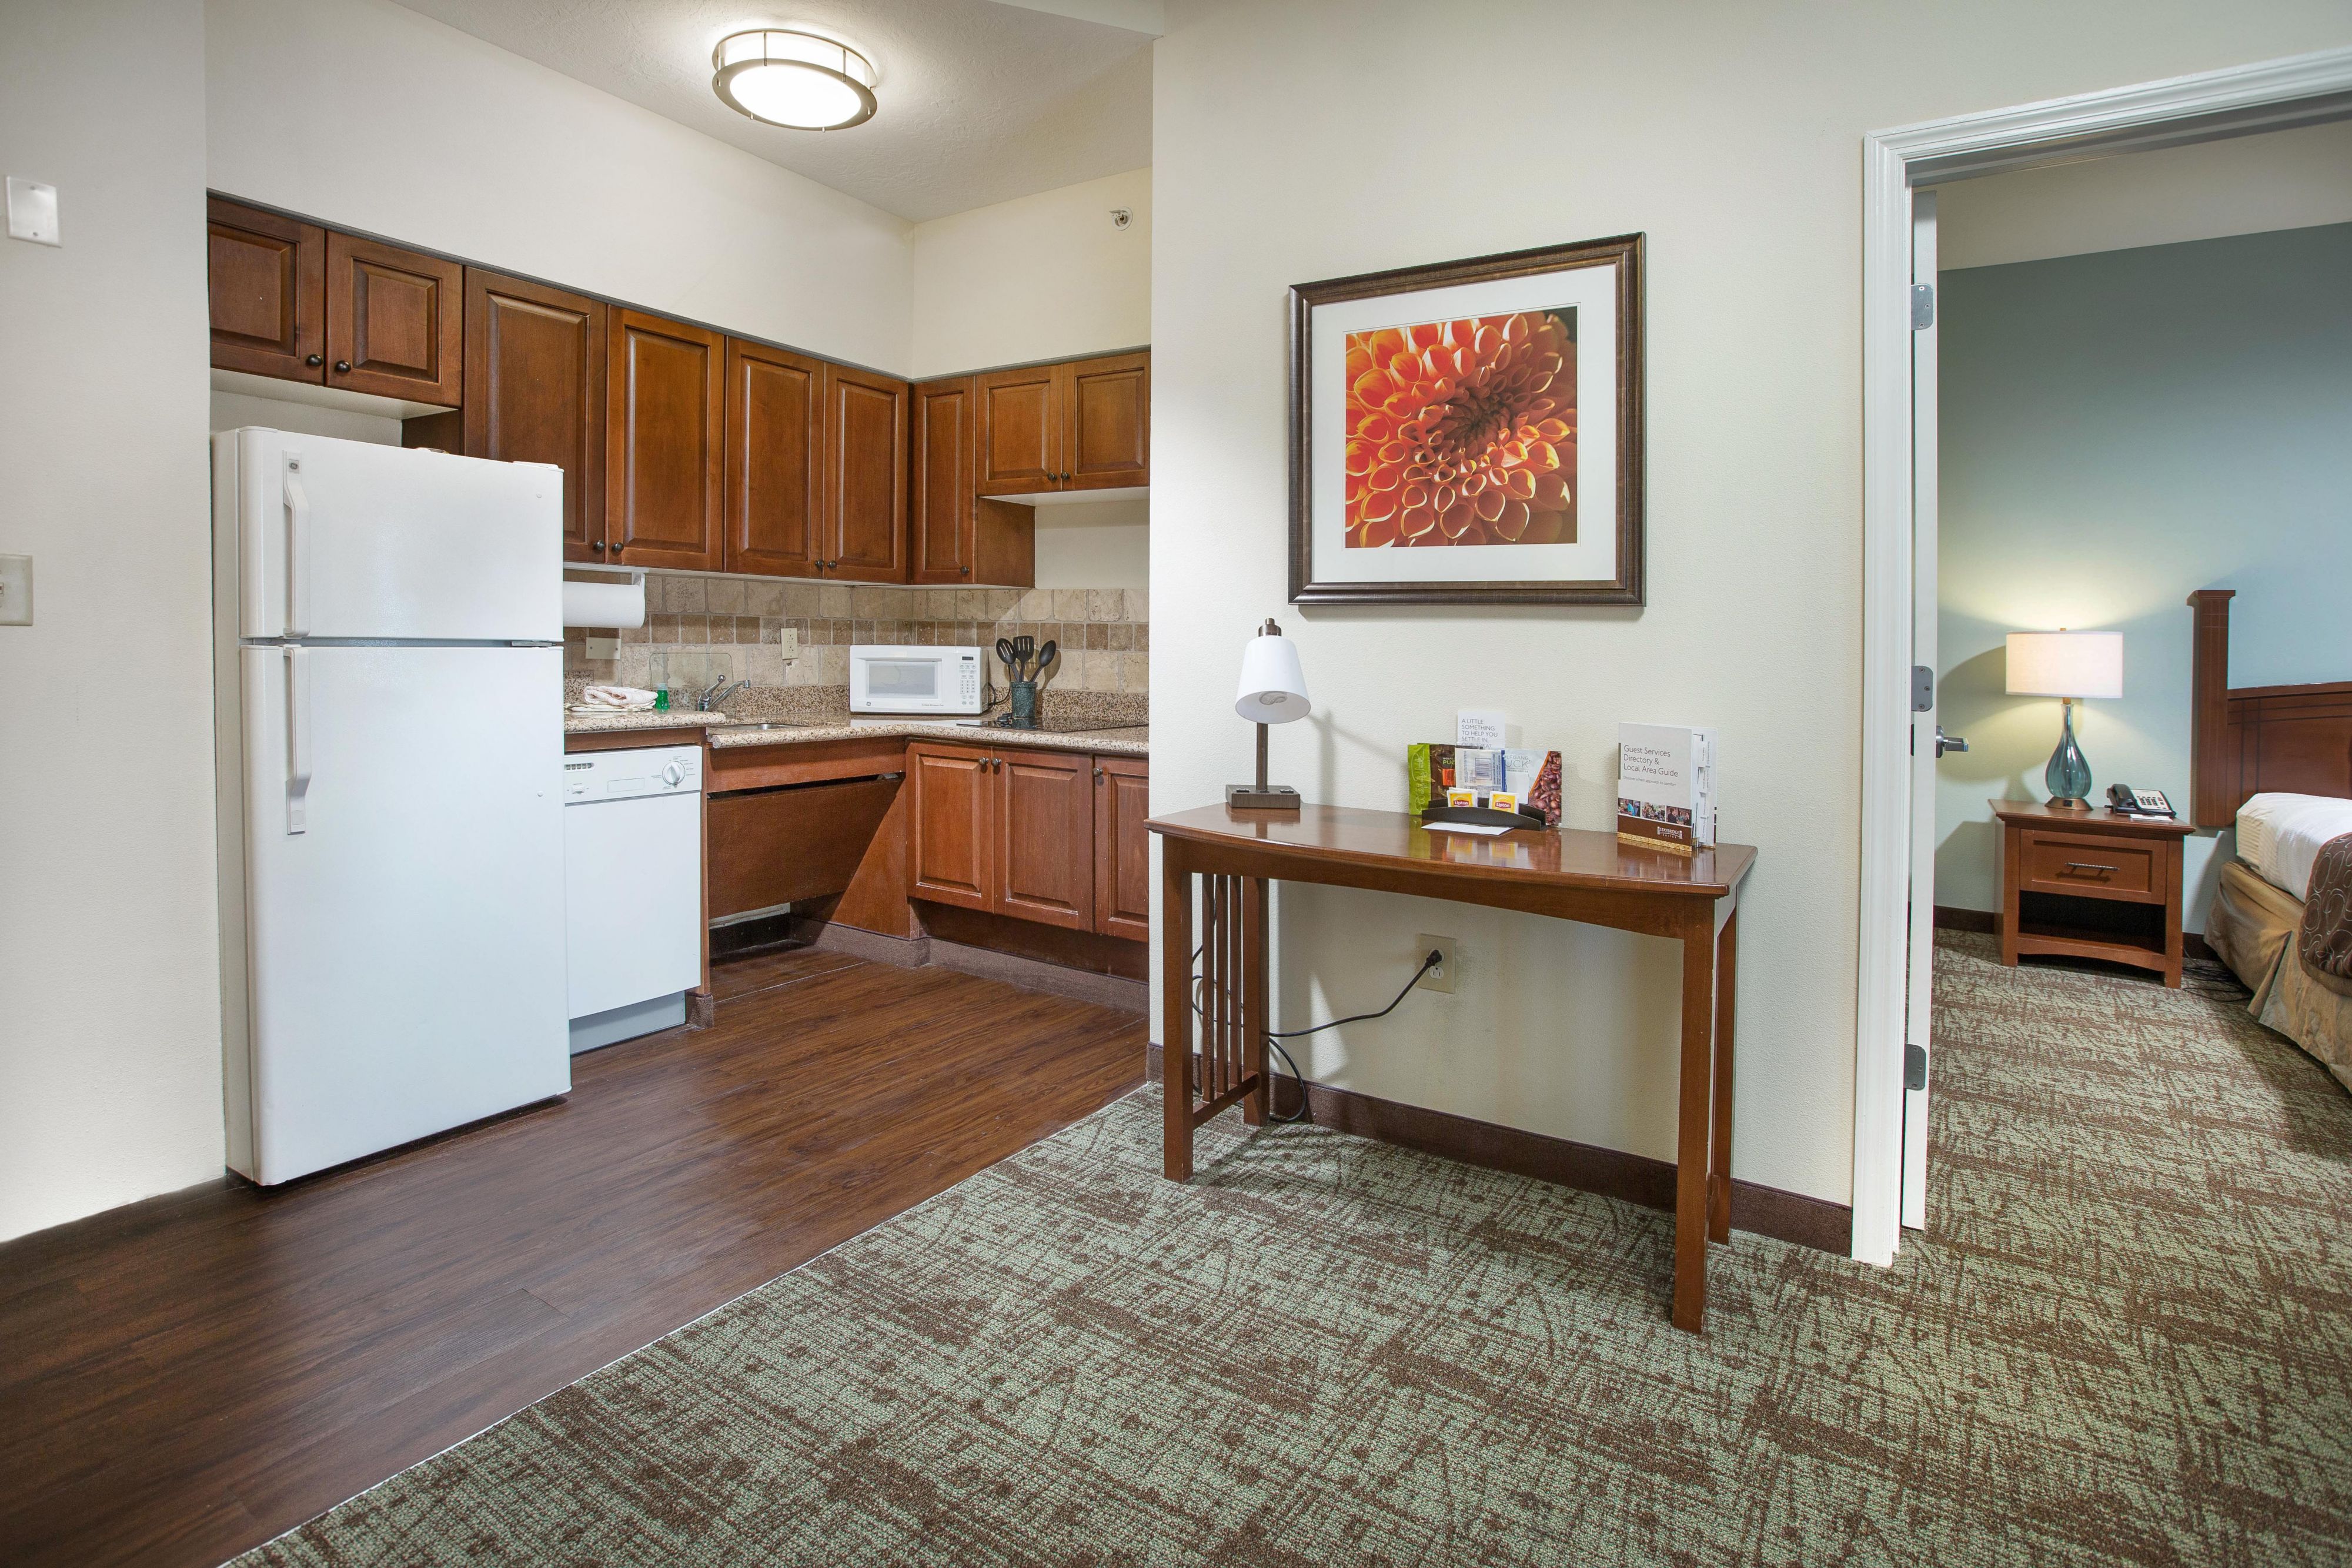 Our apartment-style spacious suites all have full kitchens making it perfect for your long-term stay in Augusta, GA.  On a special project for work? Relocating to or from Augusta? Visiting family or friends? Whatever the reason, we will make you feel at home. 